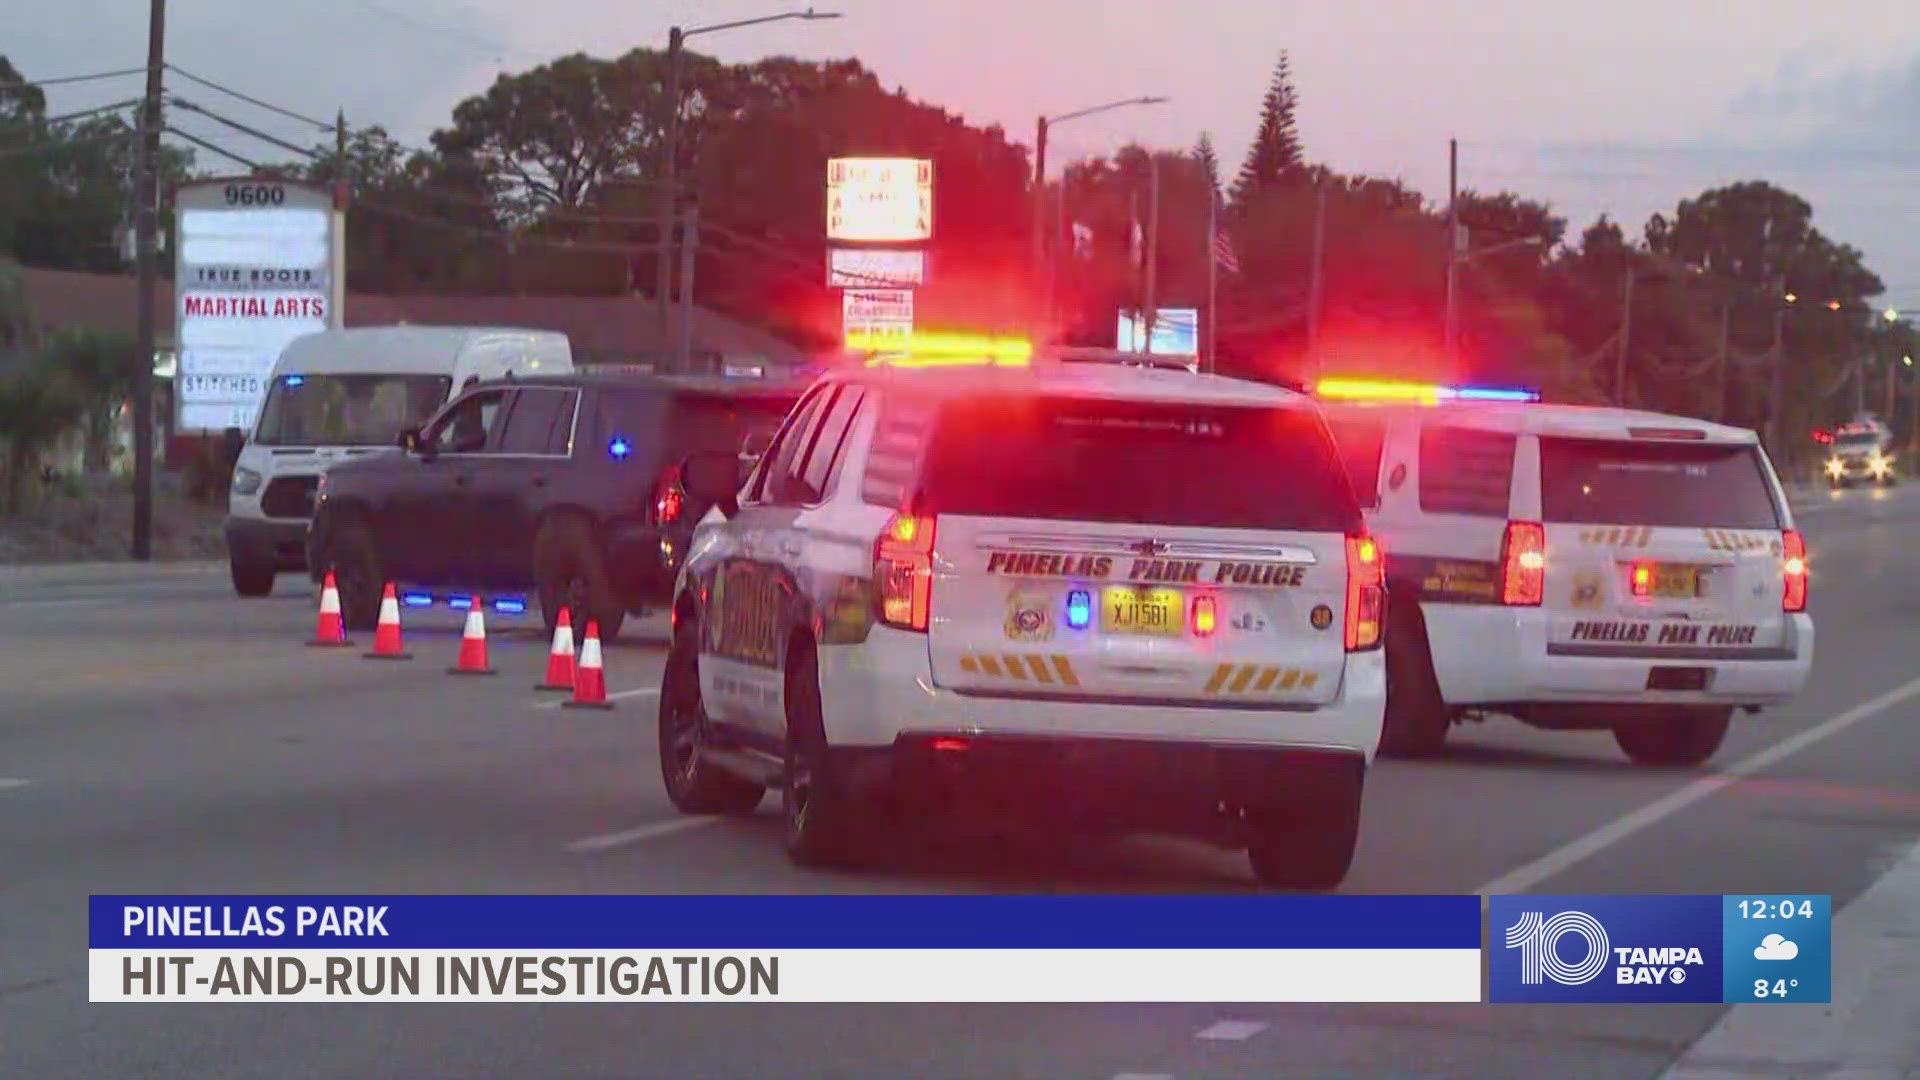 Pinellas Park Police are looking for a driver after a hit-and-run on 66th Street North just south of Orleans Way.